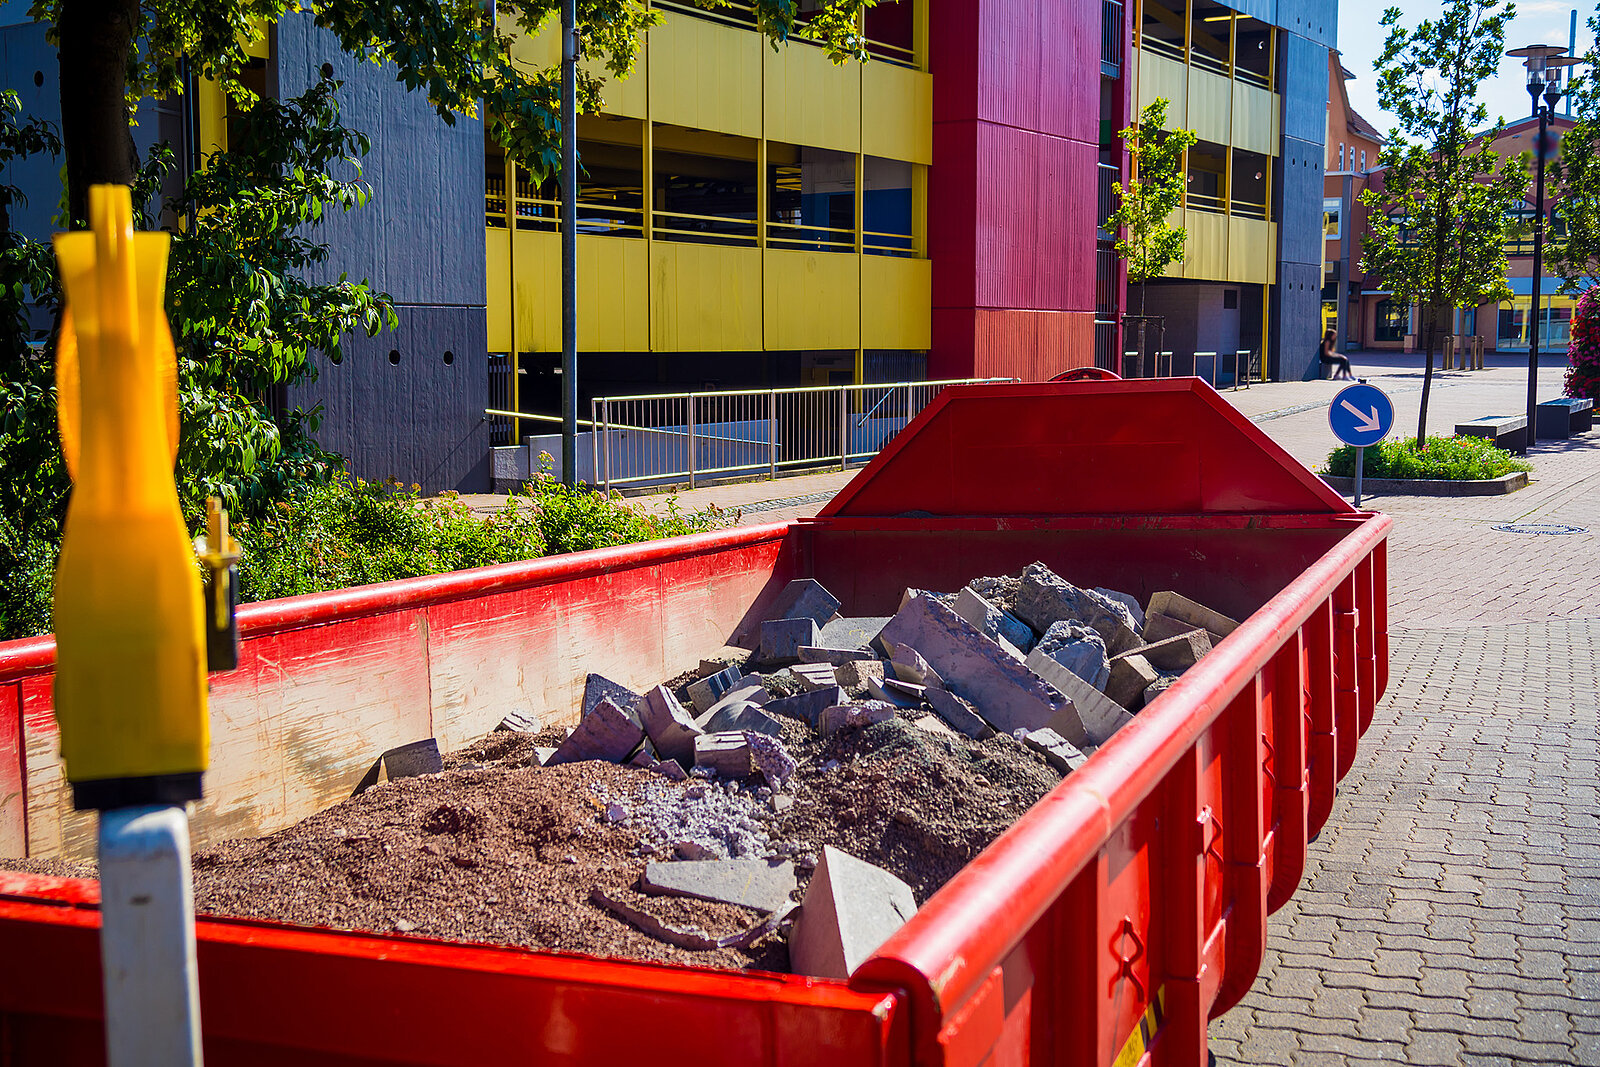 A metal tub containing construction waste. A building in the background